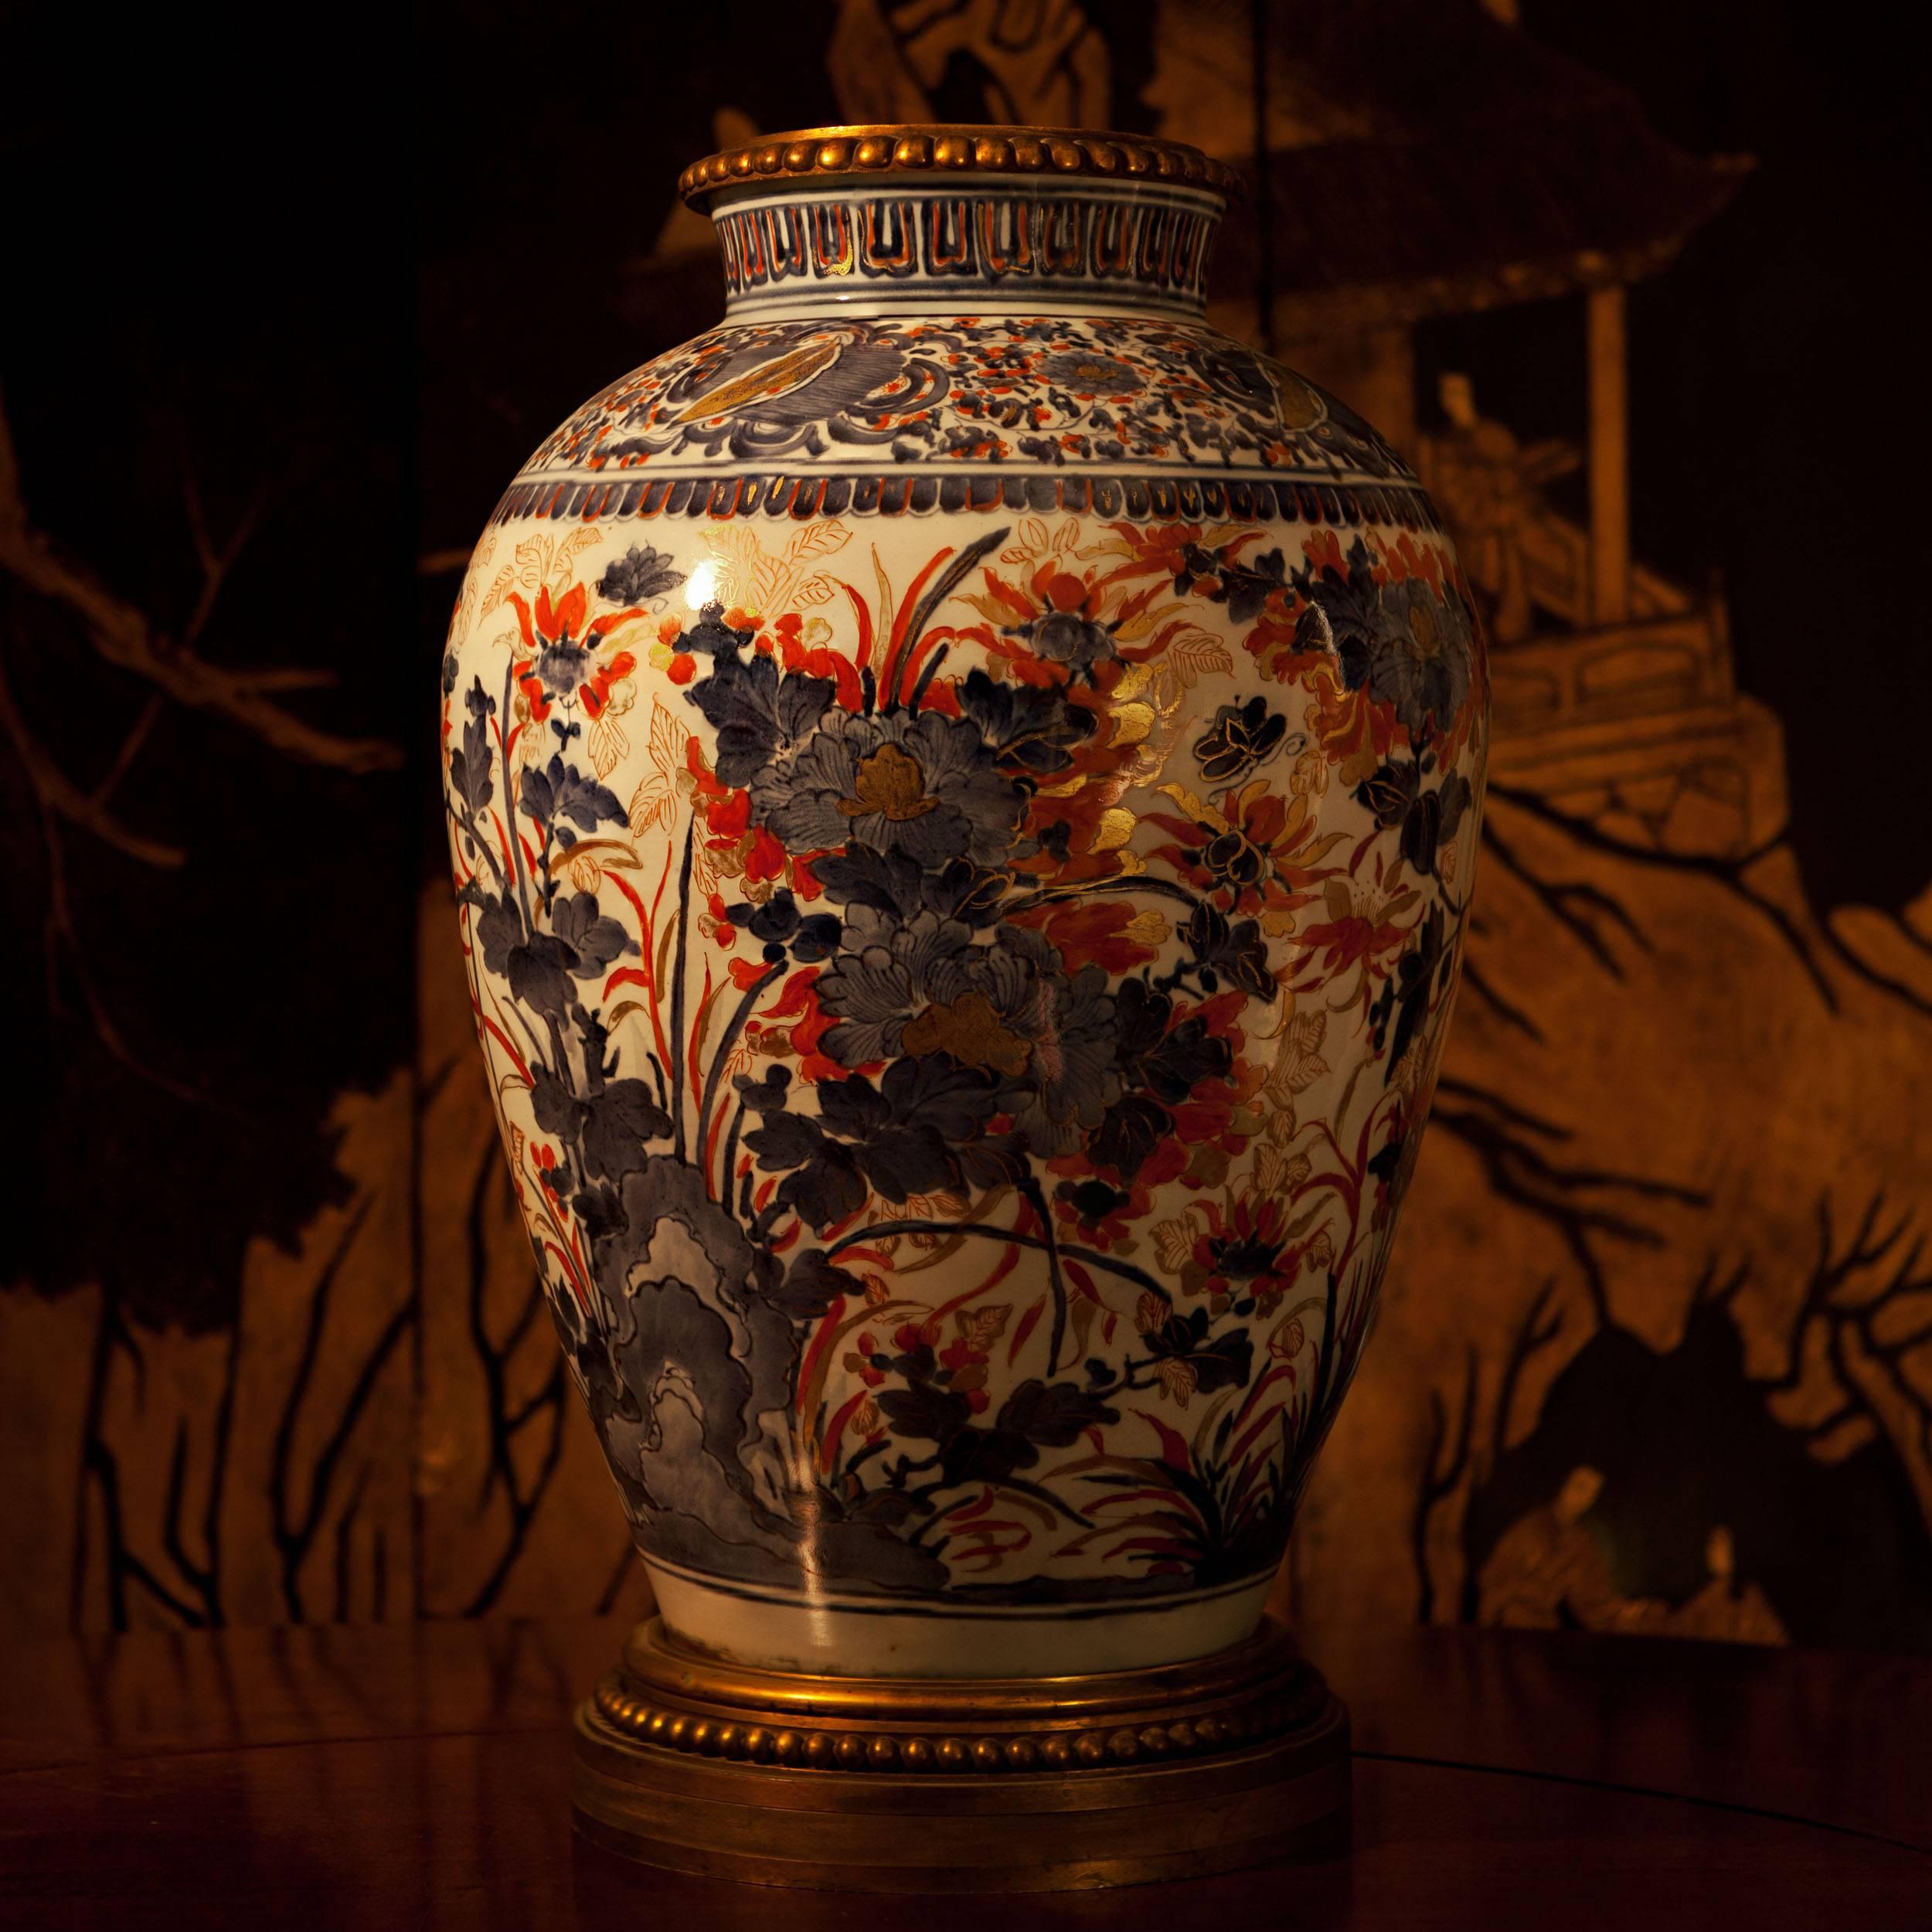 China, circa 1760, 
​Qianlong (1711-1799).

An impressive and highly decorative 18th century Chinese Imari porcelain vase decorated with sprays of flowers in blue and white, with orange details and gilt work. The vase mounted with 19th century